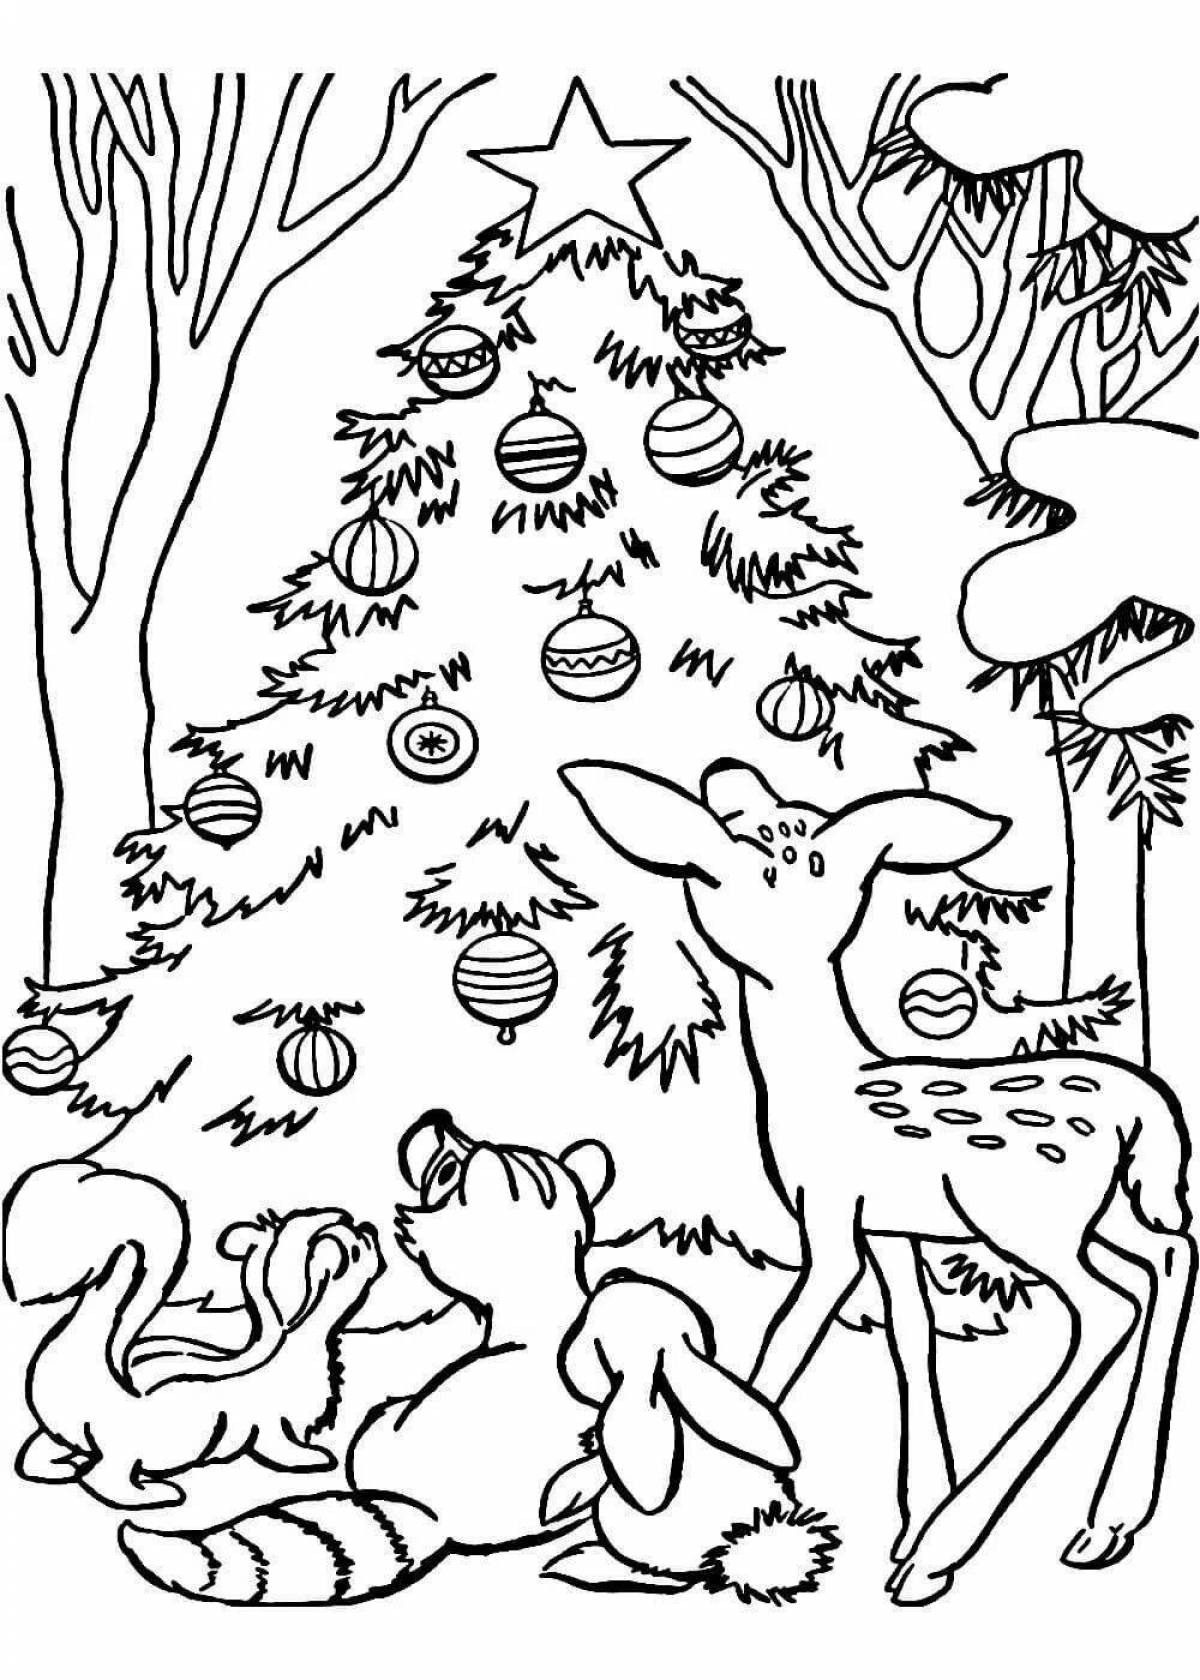 Coloring page soothing winter forest with animals